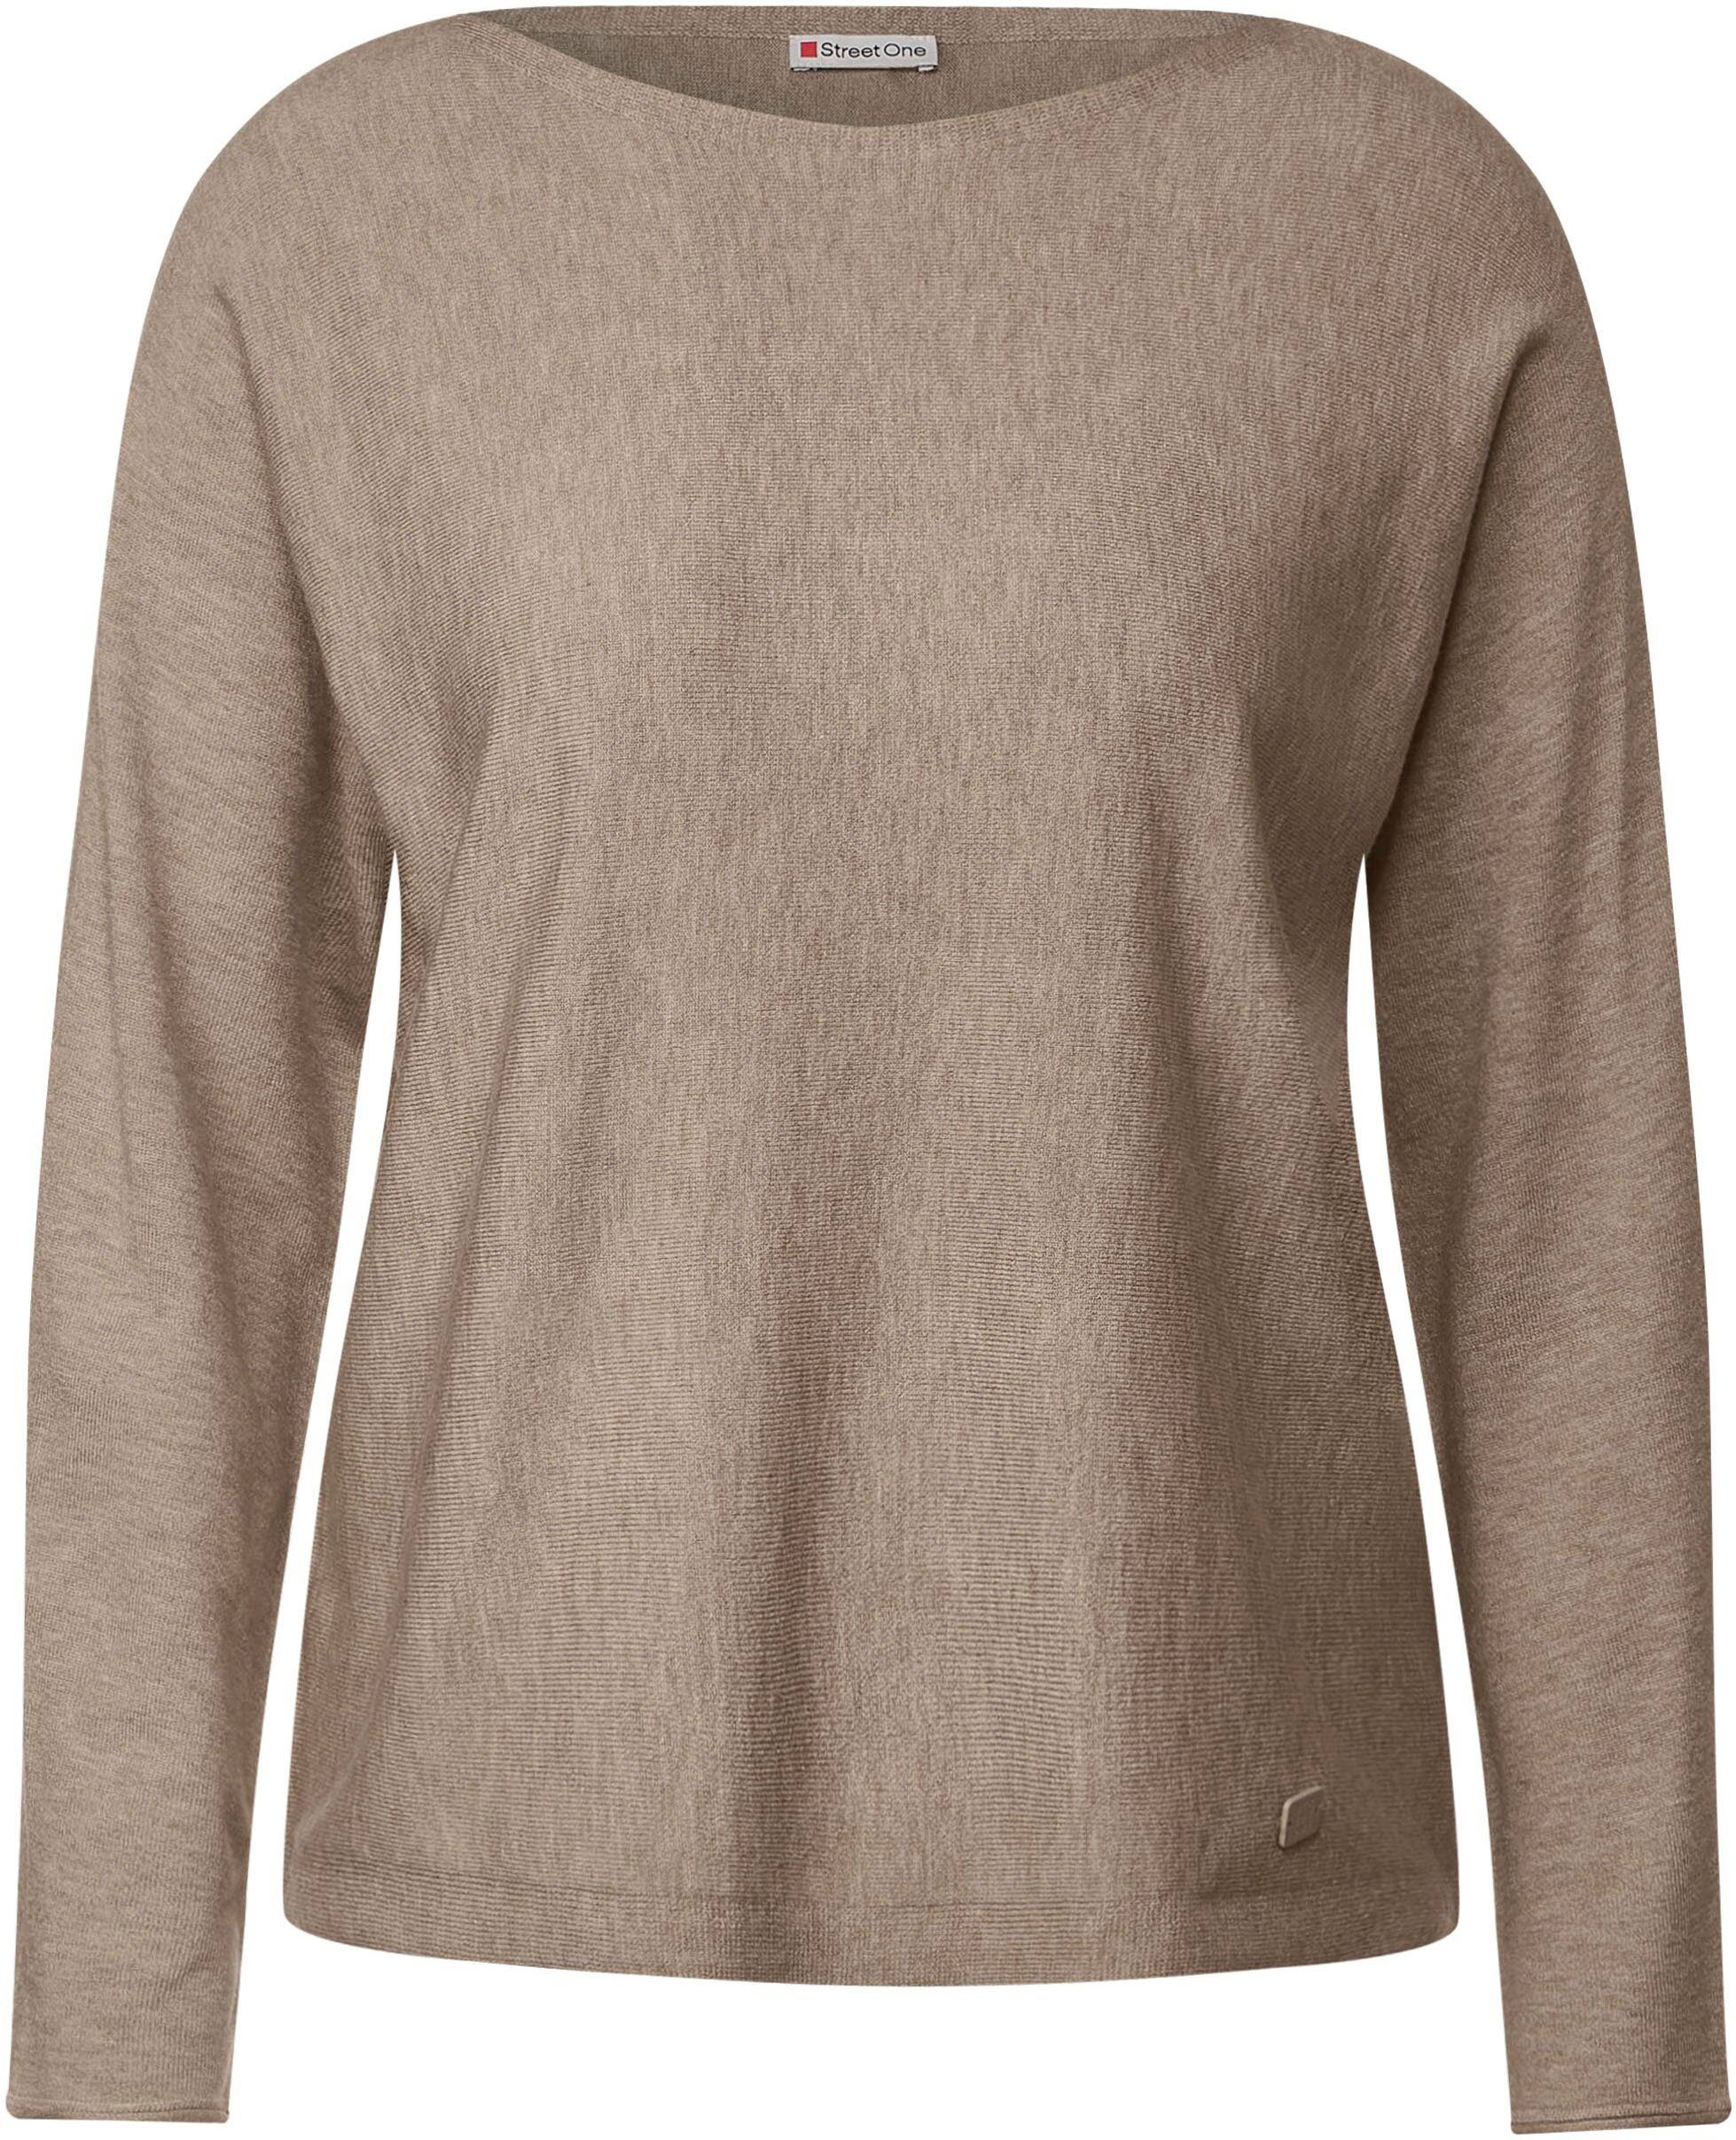 STREET ONE Strickpullover Unifarbe bleached sand in